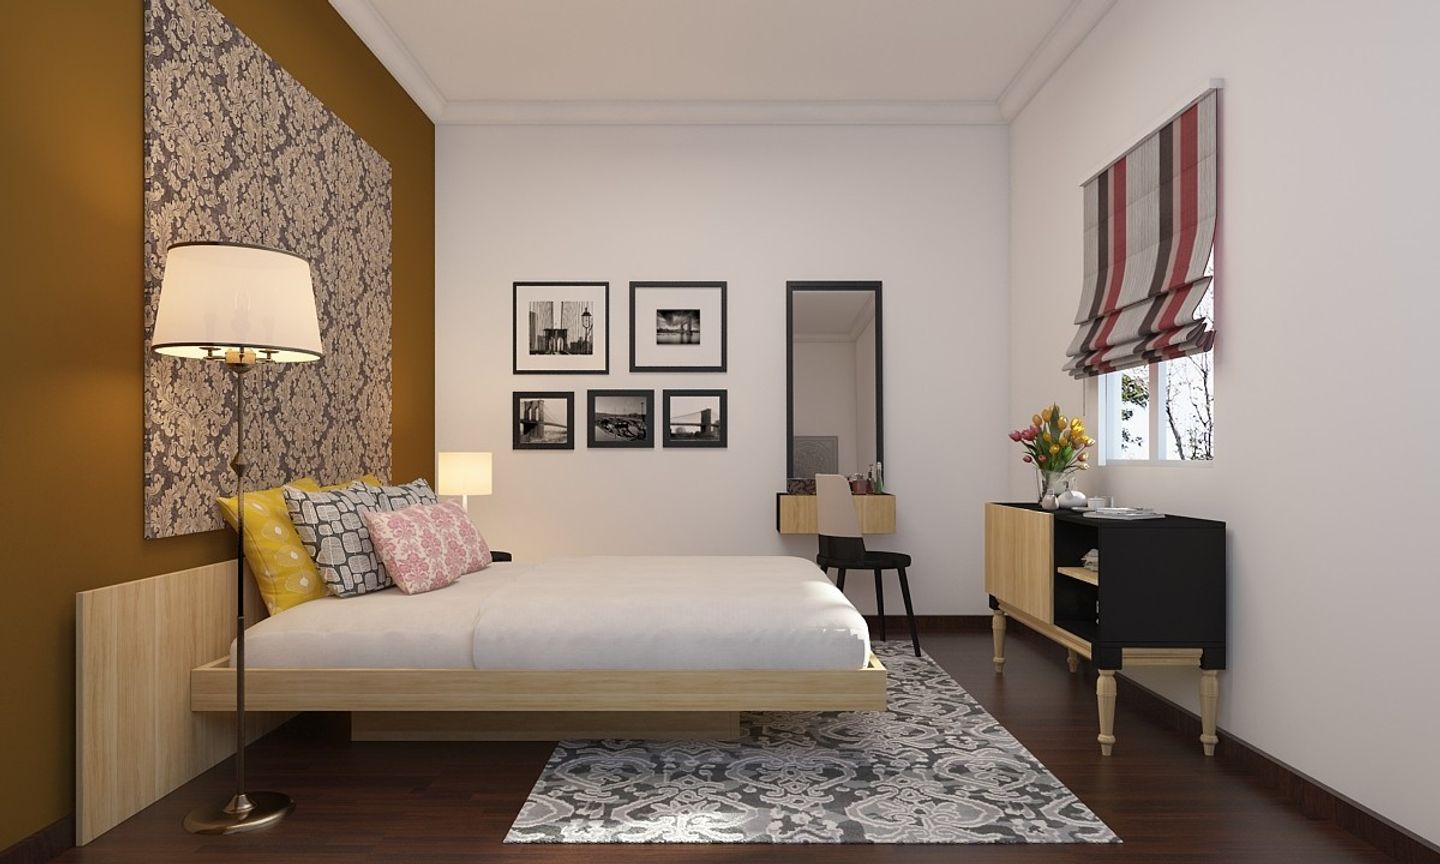 Modern Guest Bedroom Design With Mustard Orage And Oak Wood Textures